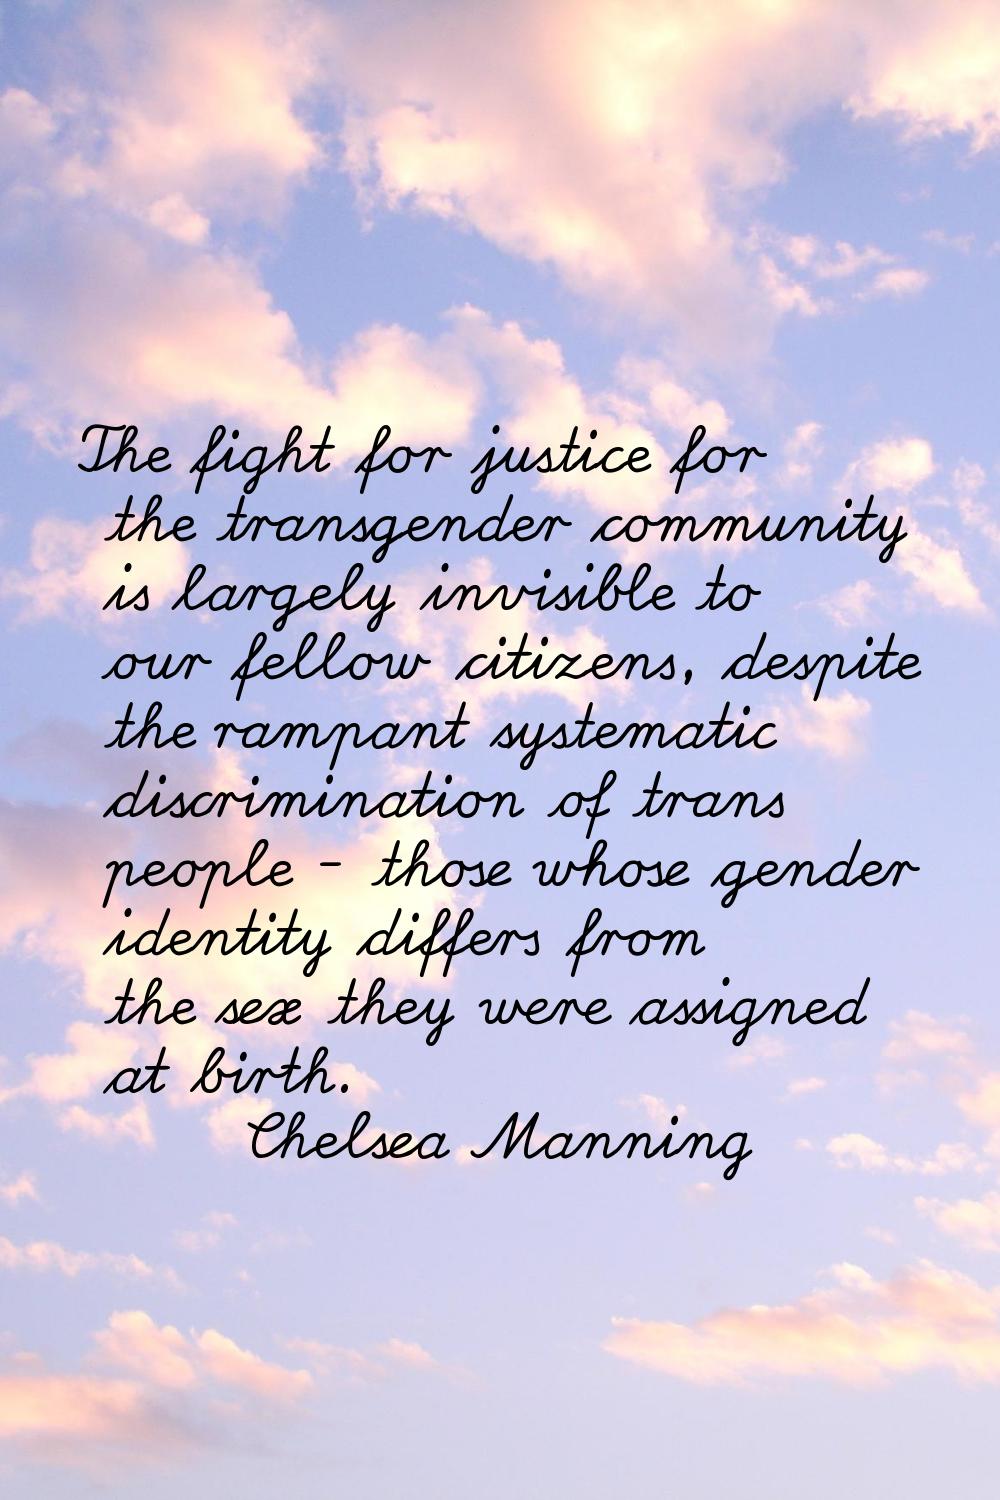 The fight for justice for the transgender community is largely invisible to our fellow citizens, de